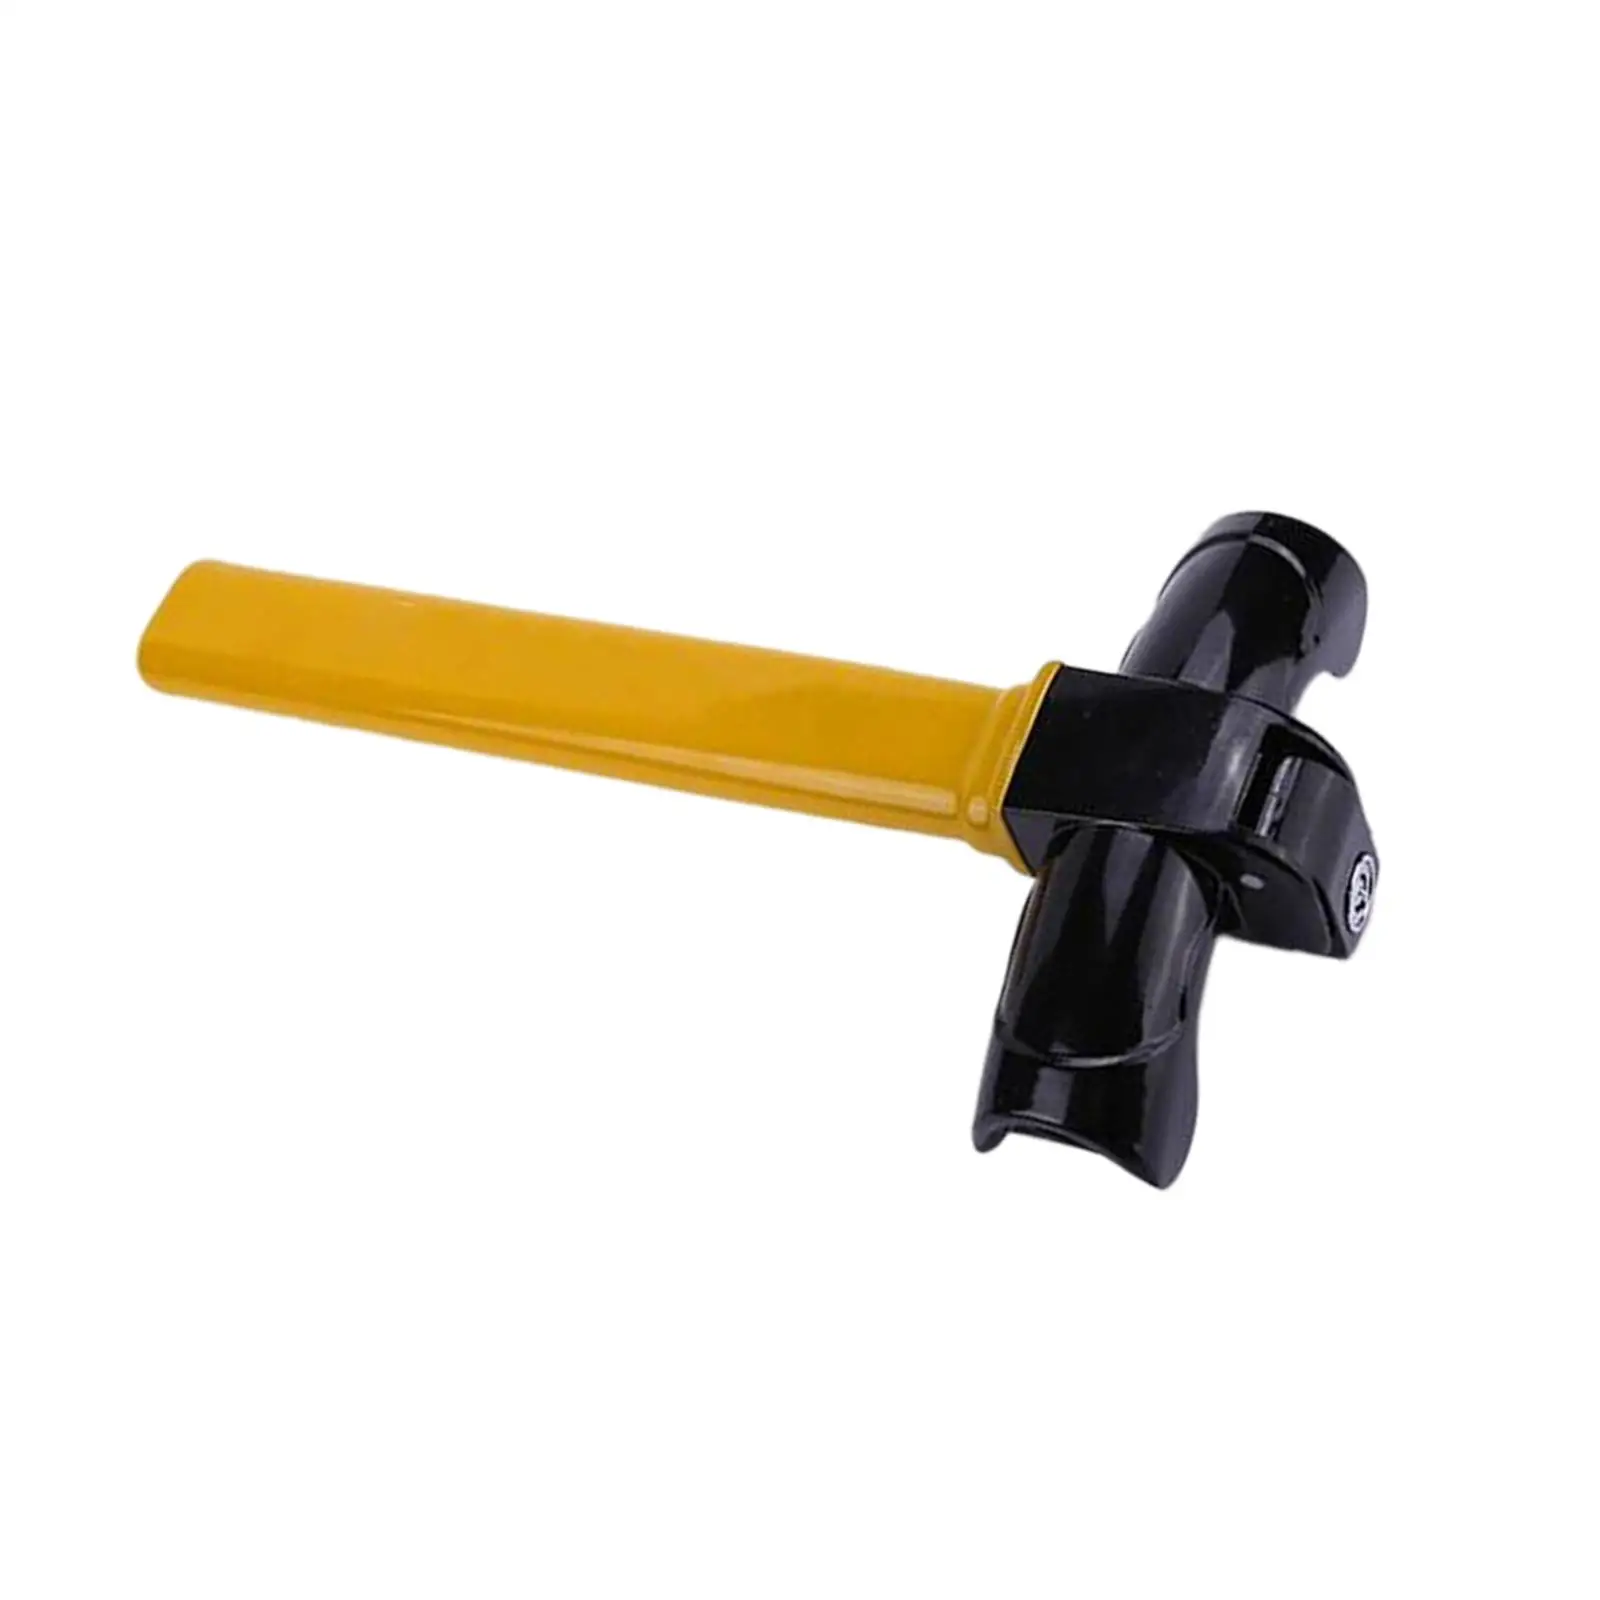 Car Steering Wheel Lock Tool Comfortable Handle Sturdy T Shaped for SUV